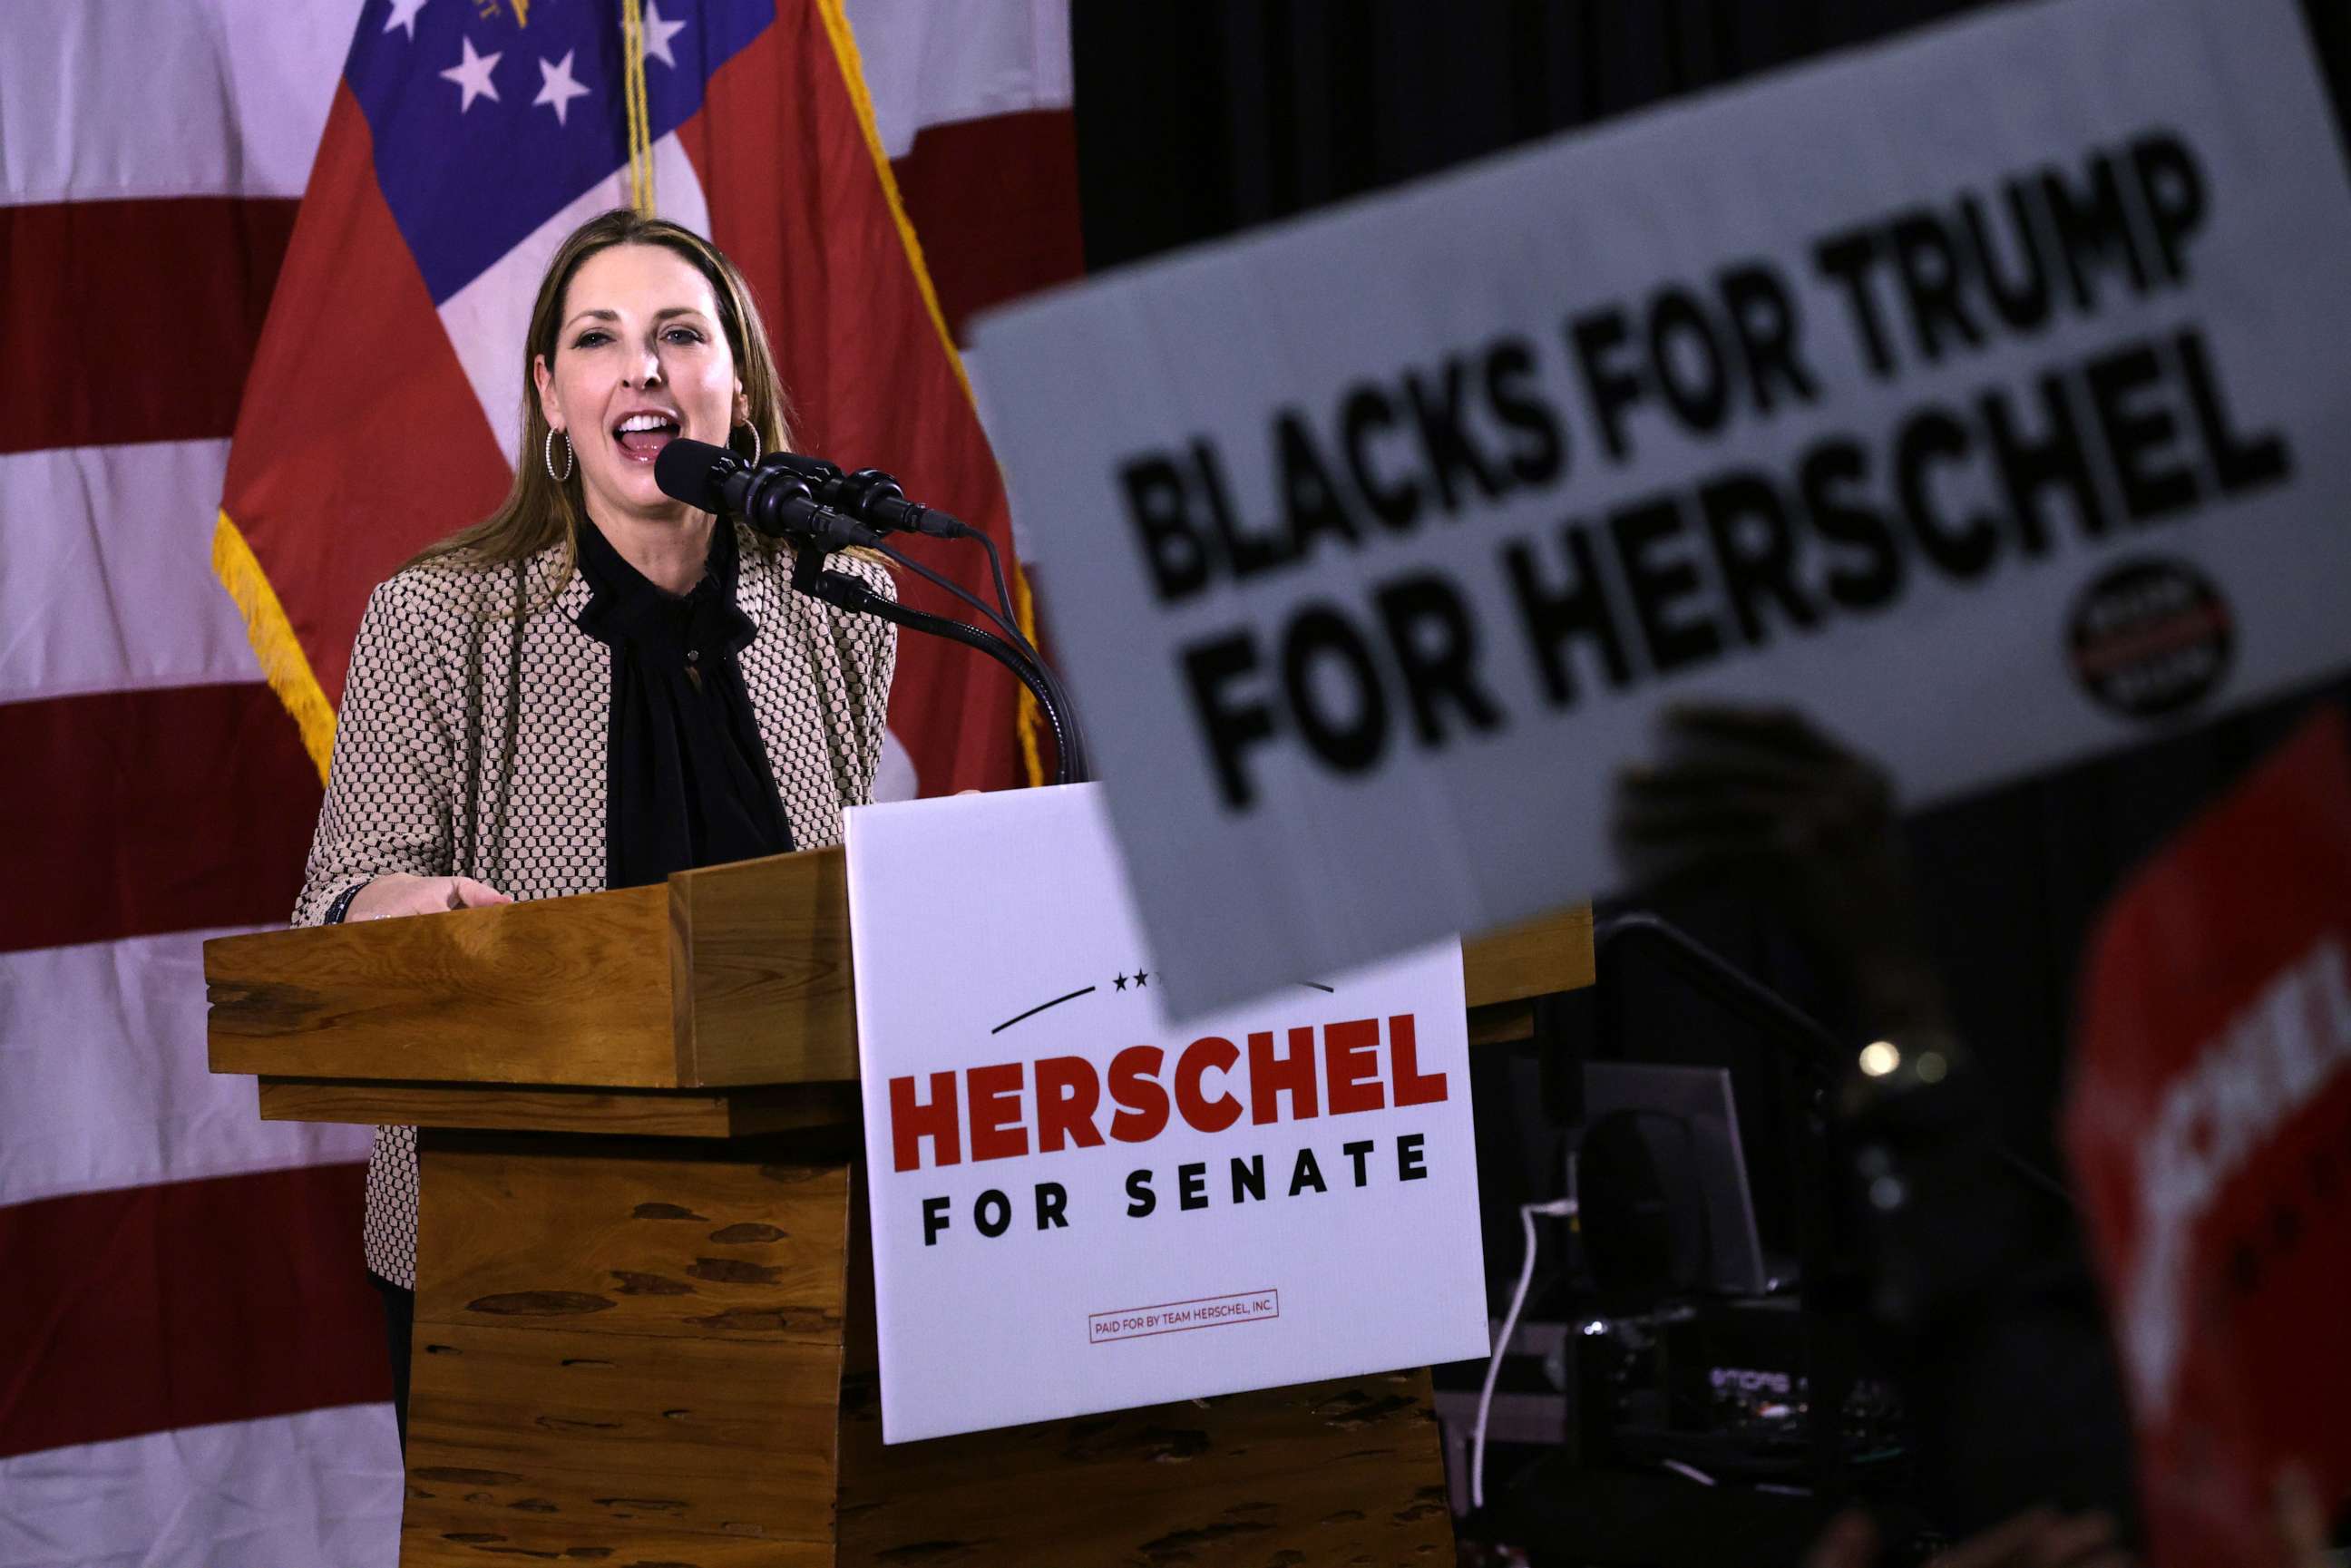 PHOTO: Republican National Committee Chair Ronna McDaniel speaks during a campaign rally for Georgia Republican senate candidate Herschel Walker on December 5, 2022 in Kennesaw, Georgia.